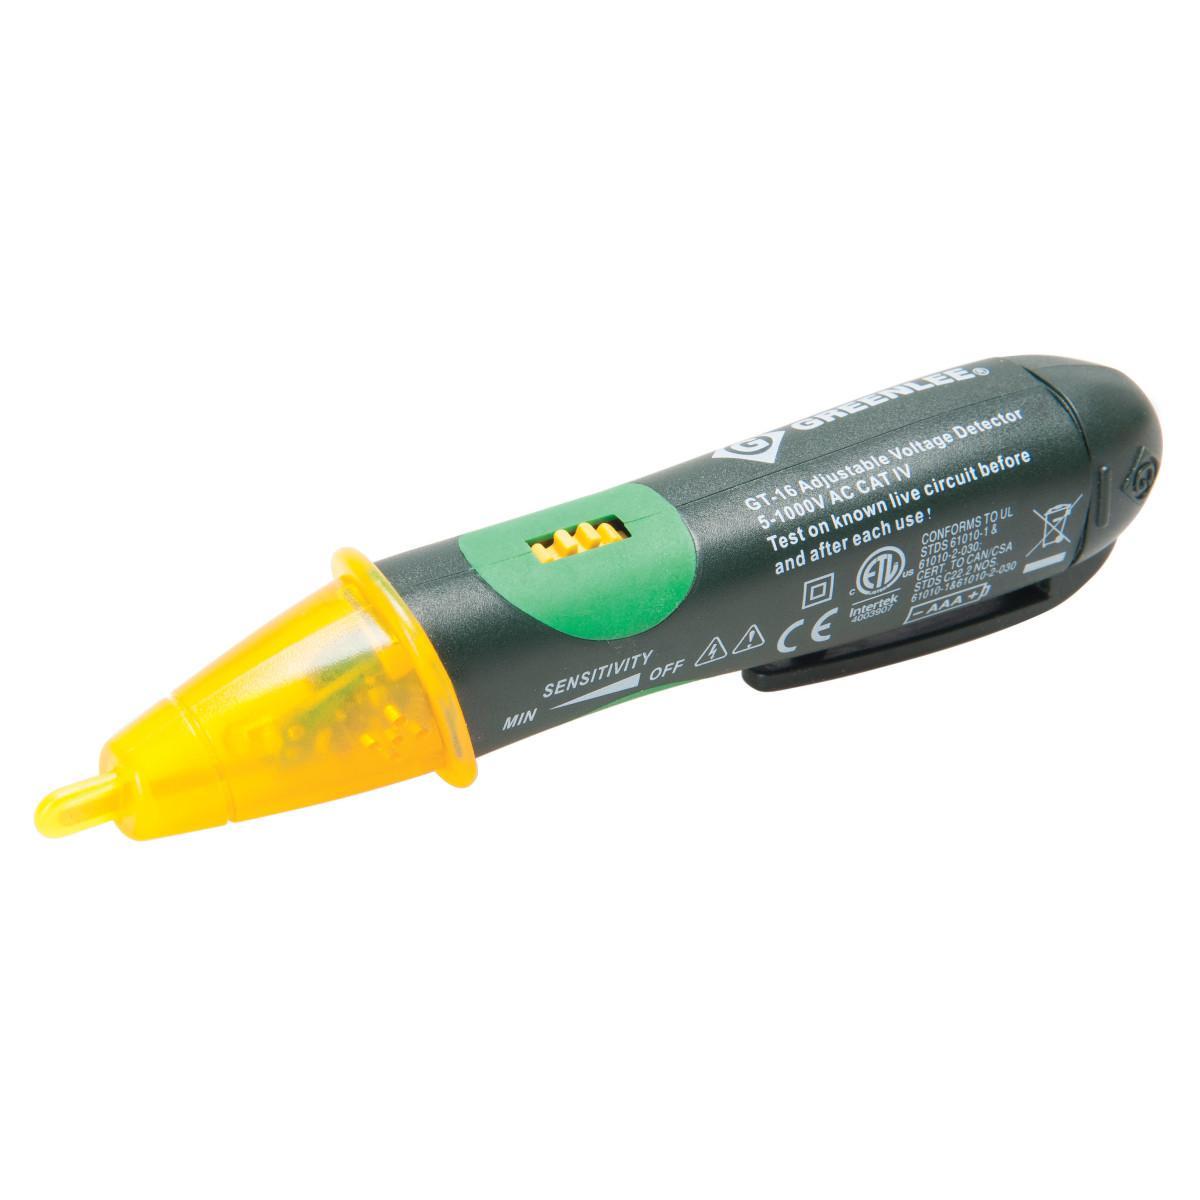 FLASHLIGHT LED GREENLEE BATTERY OPERATED